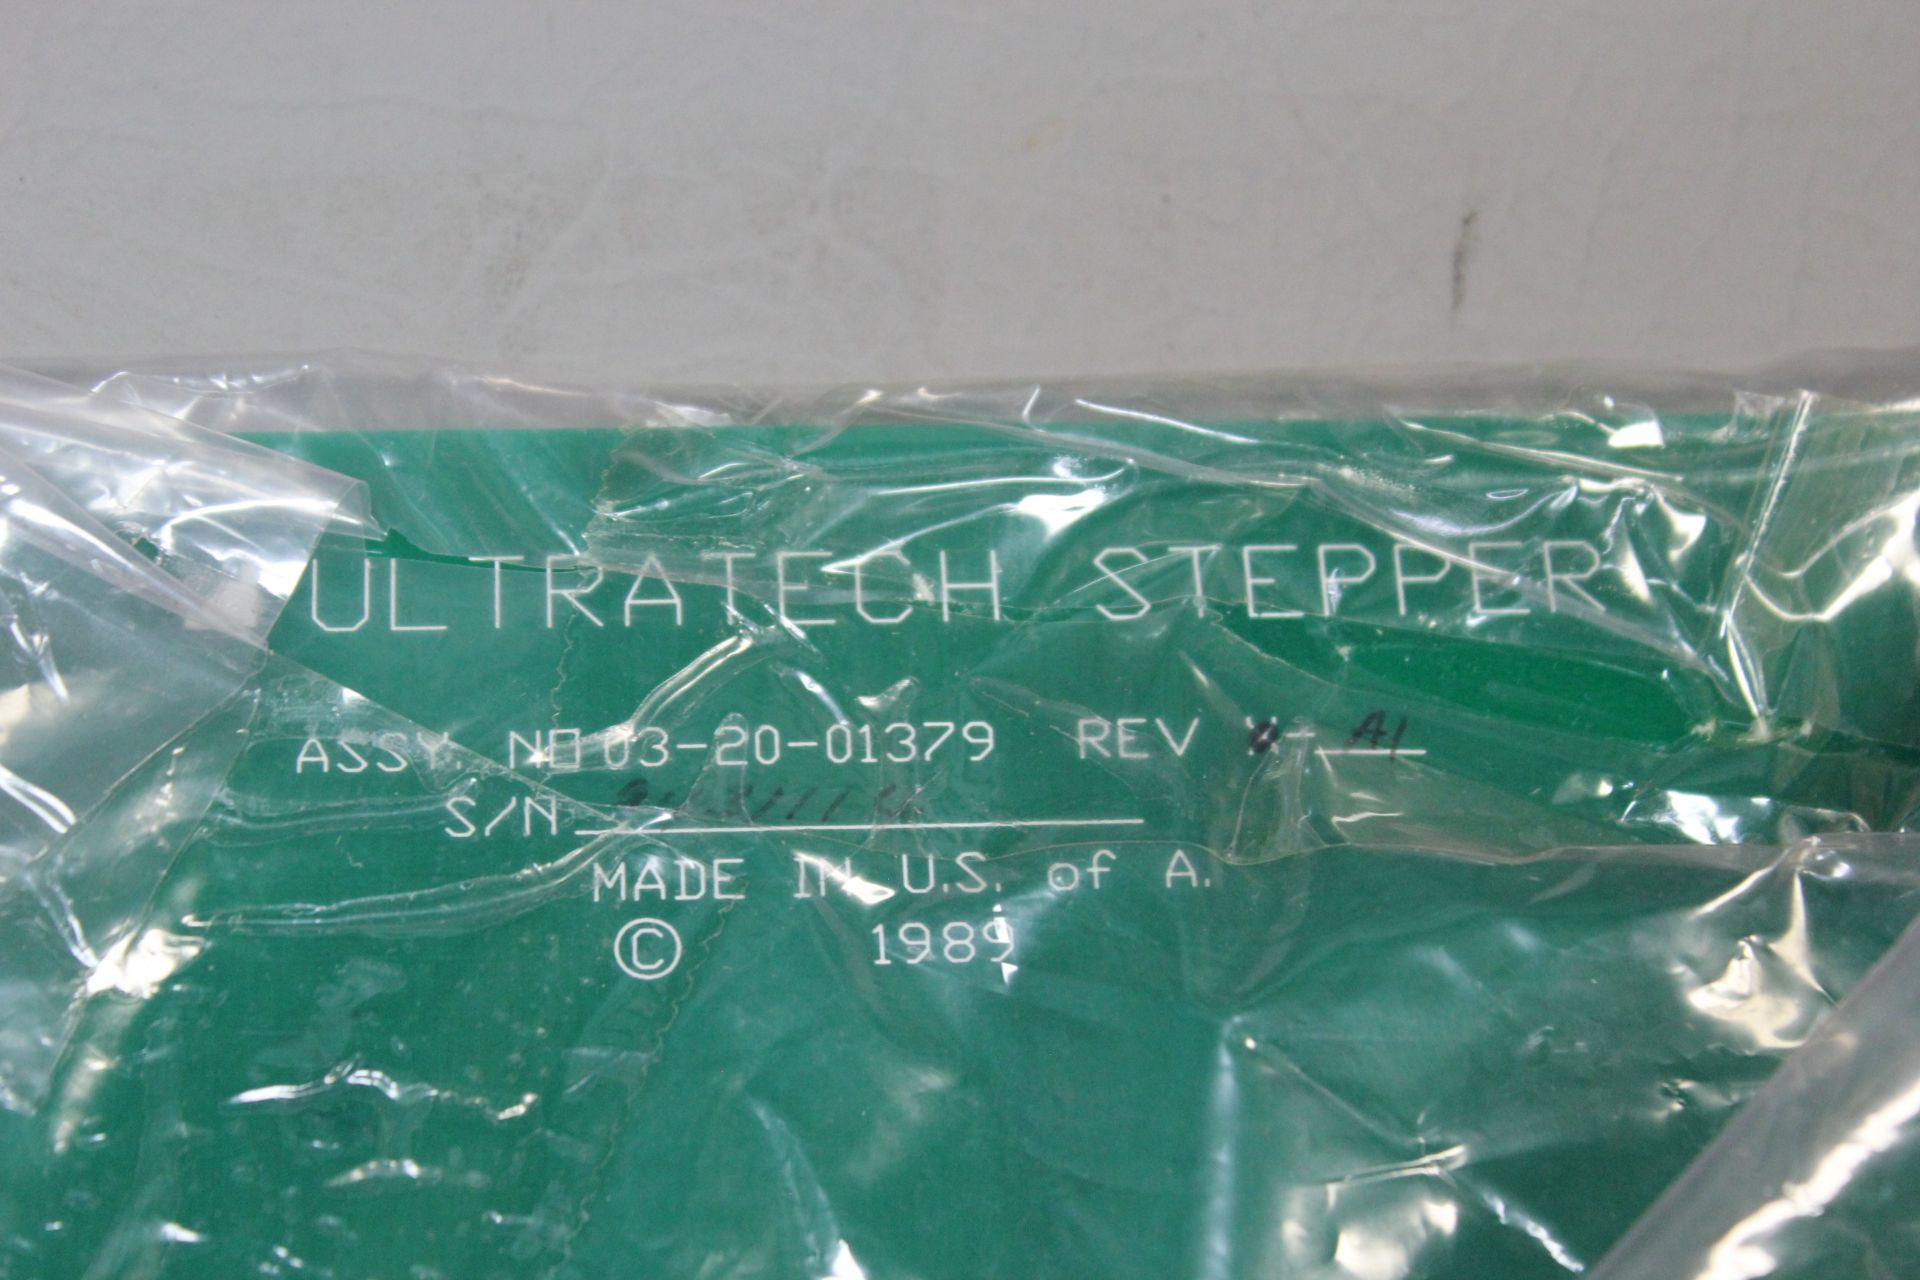 ULTRATECH STEPPER COMPUTER PRODUCTS - Image 4 of 5